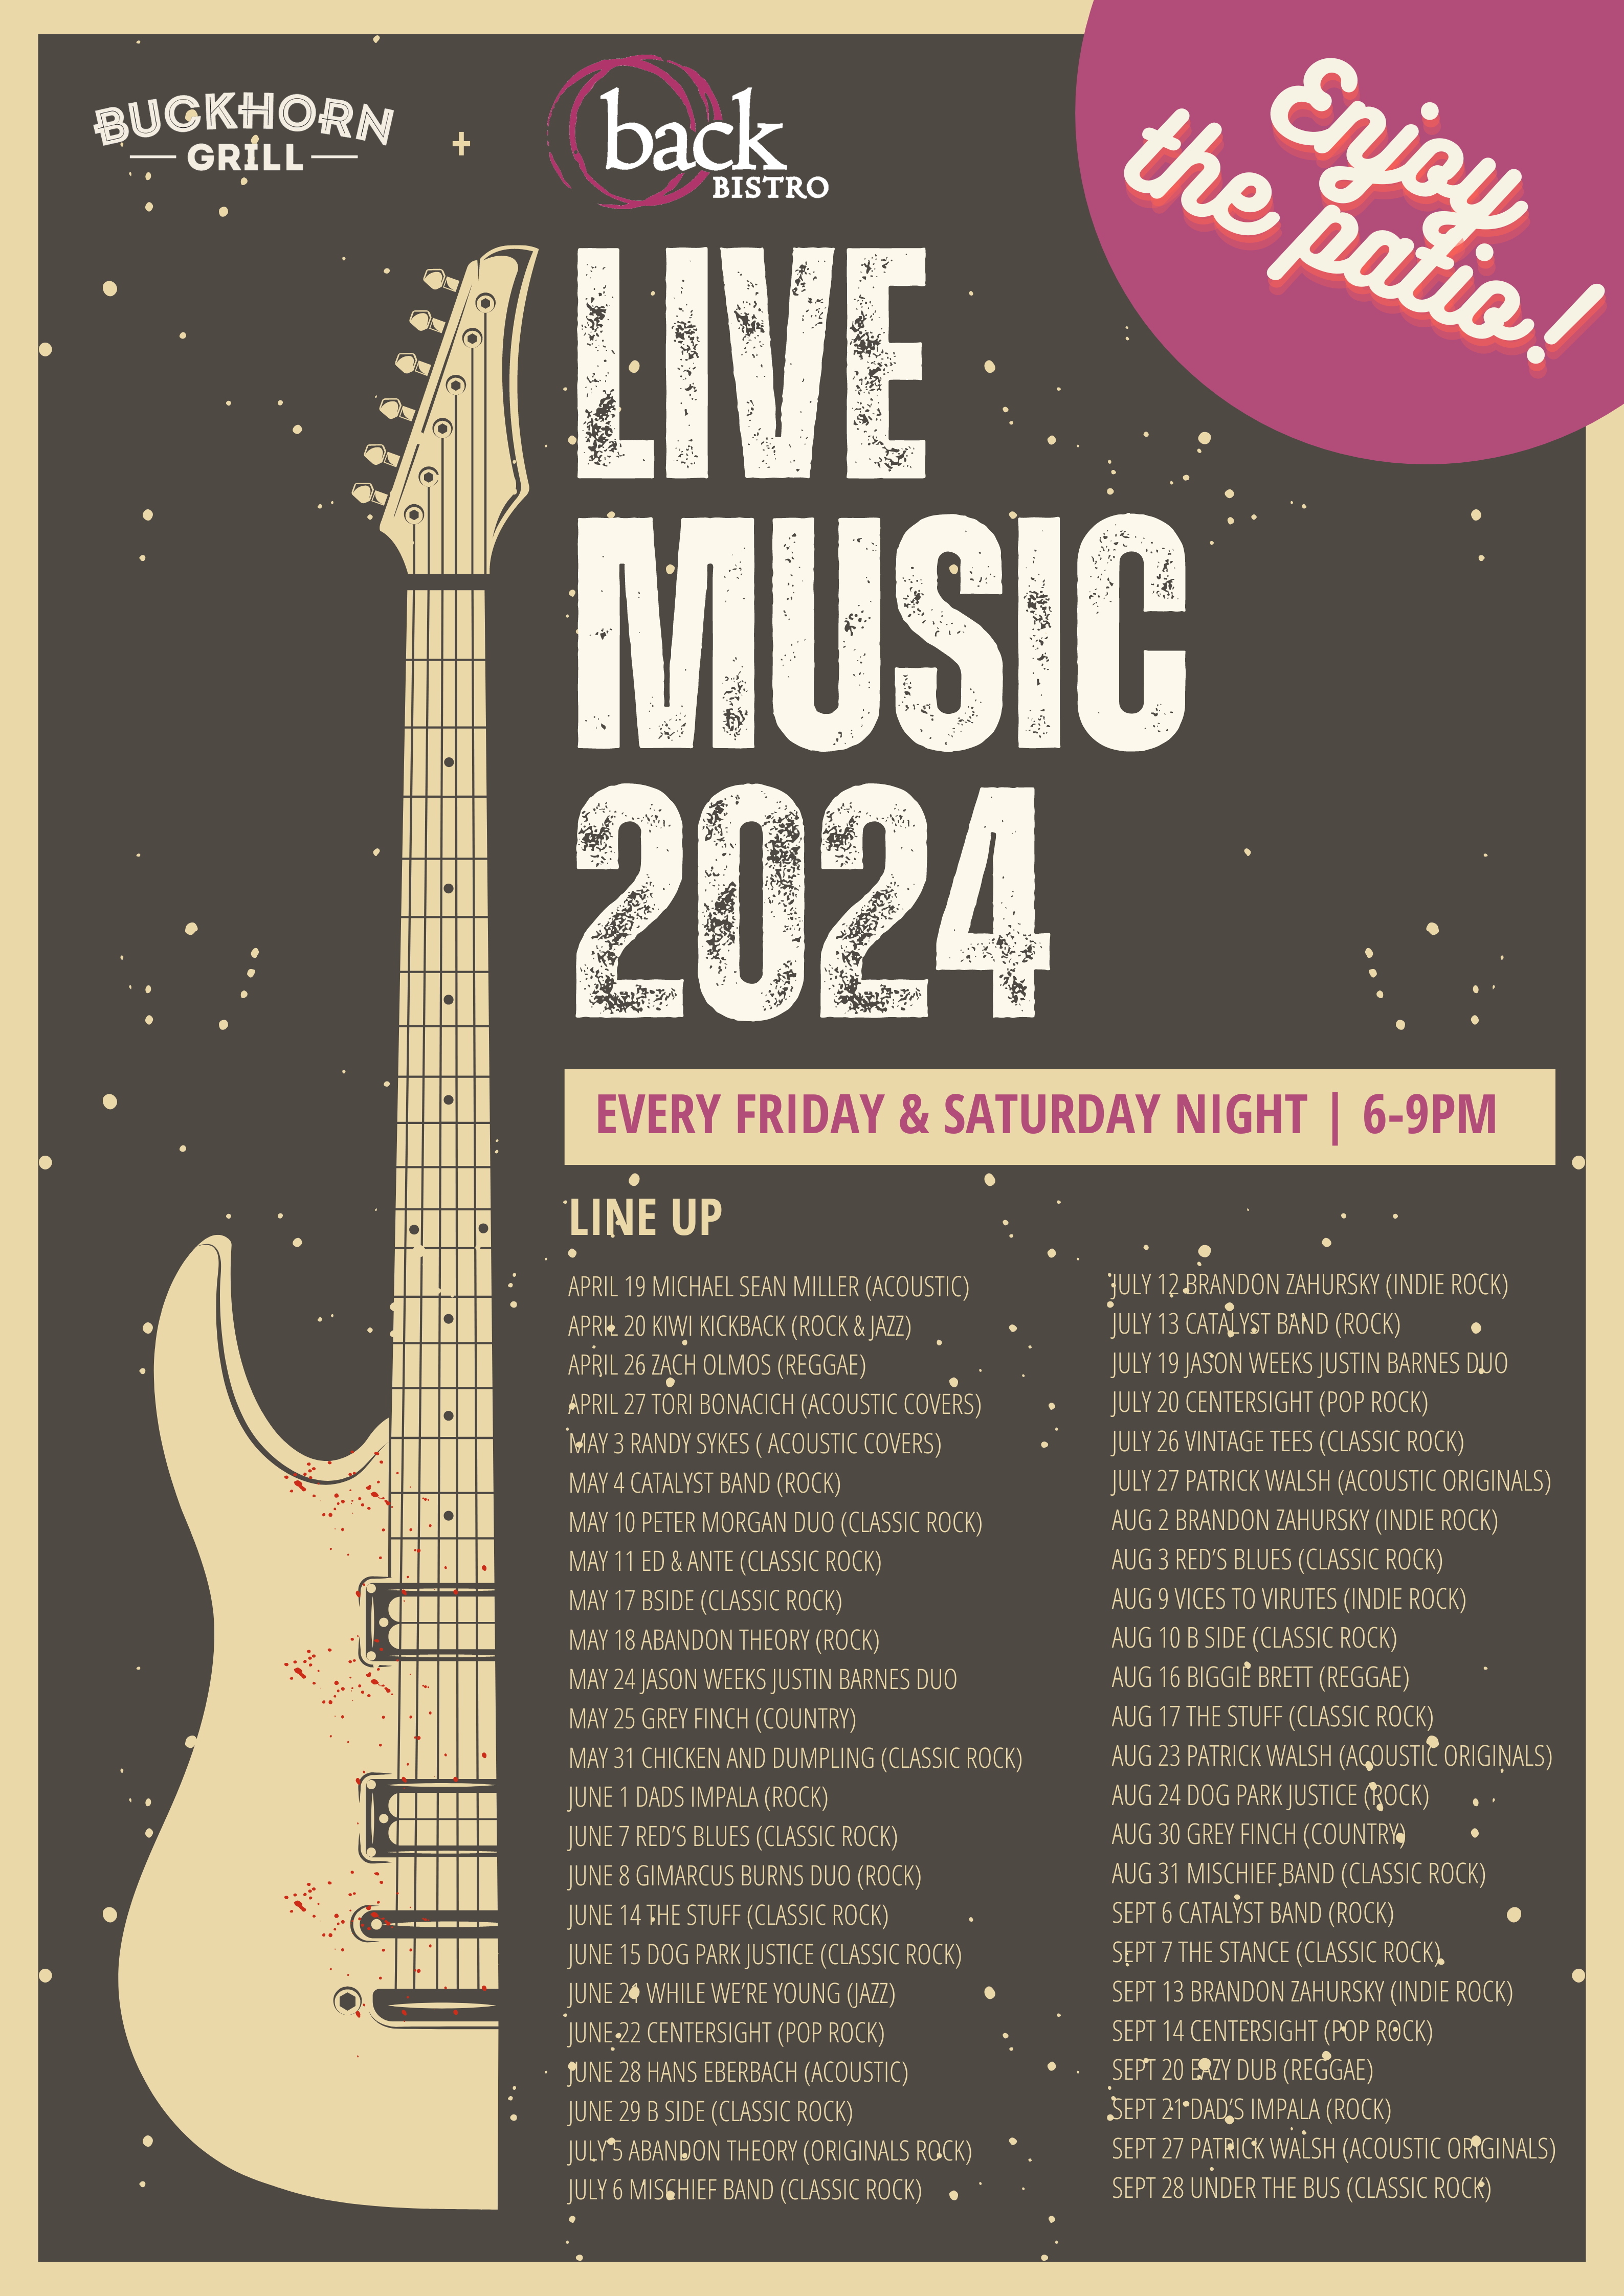 Live music on the patio Friday and Saturday nights